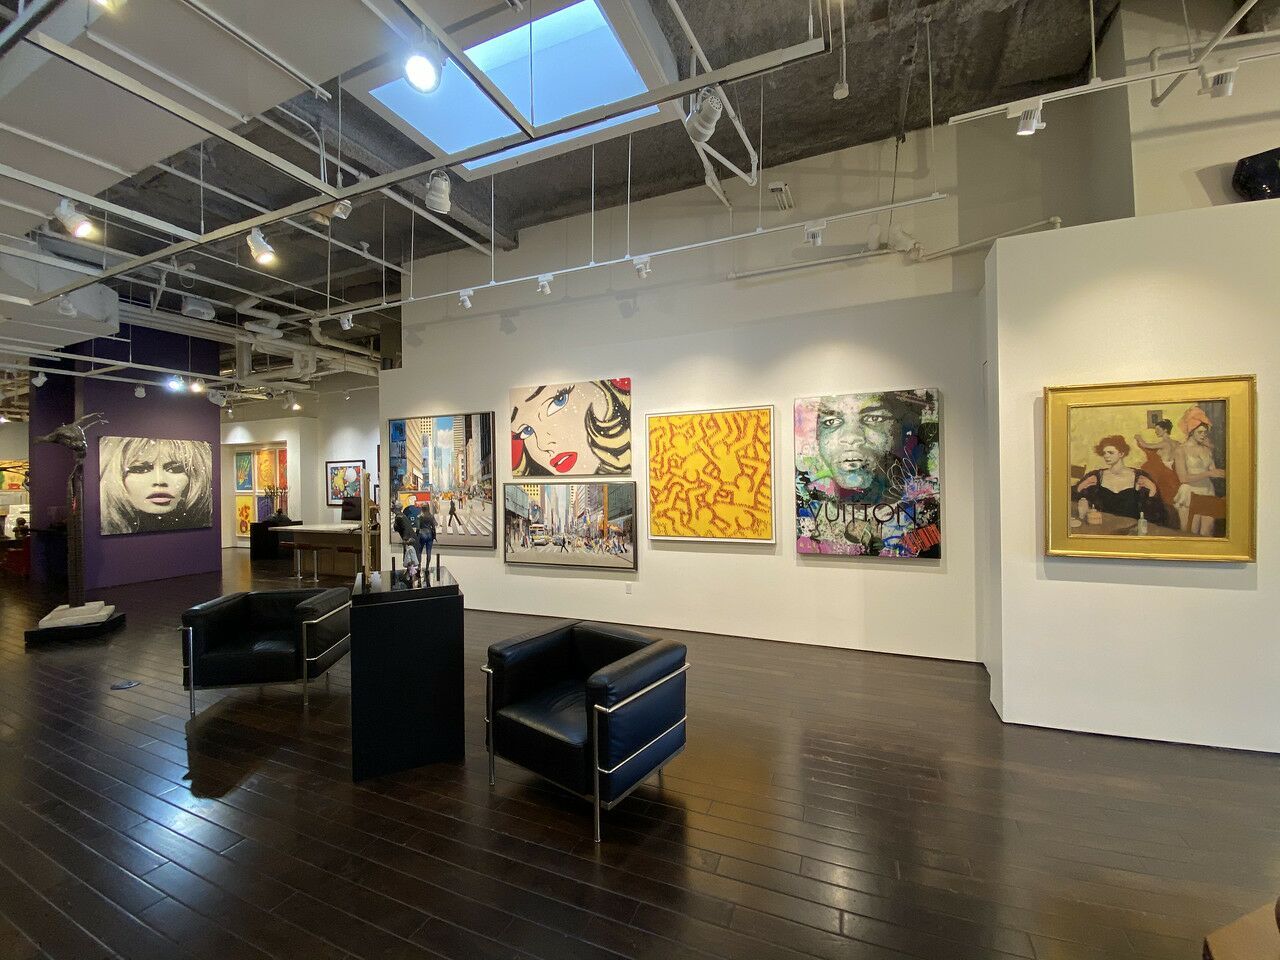 Off The Wall Gallery art work and open floor space